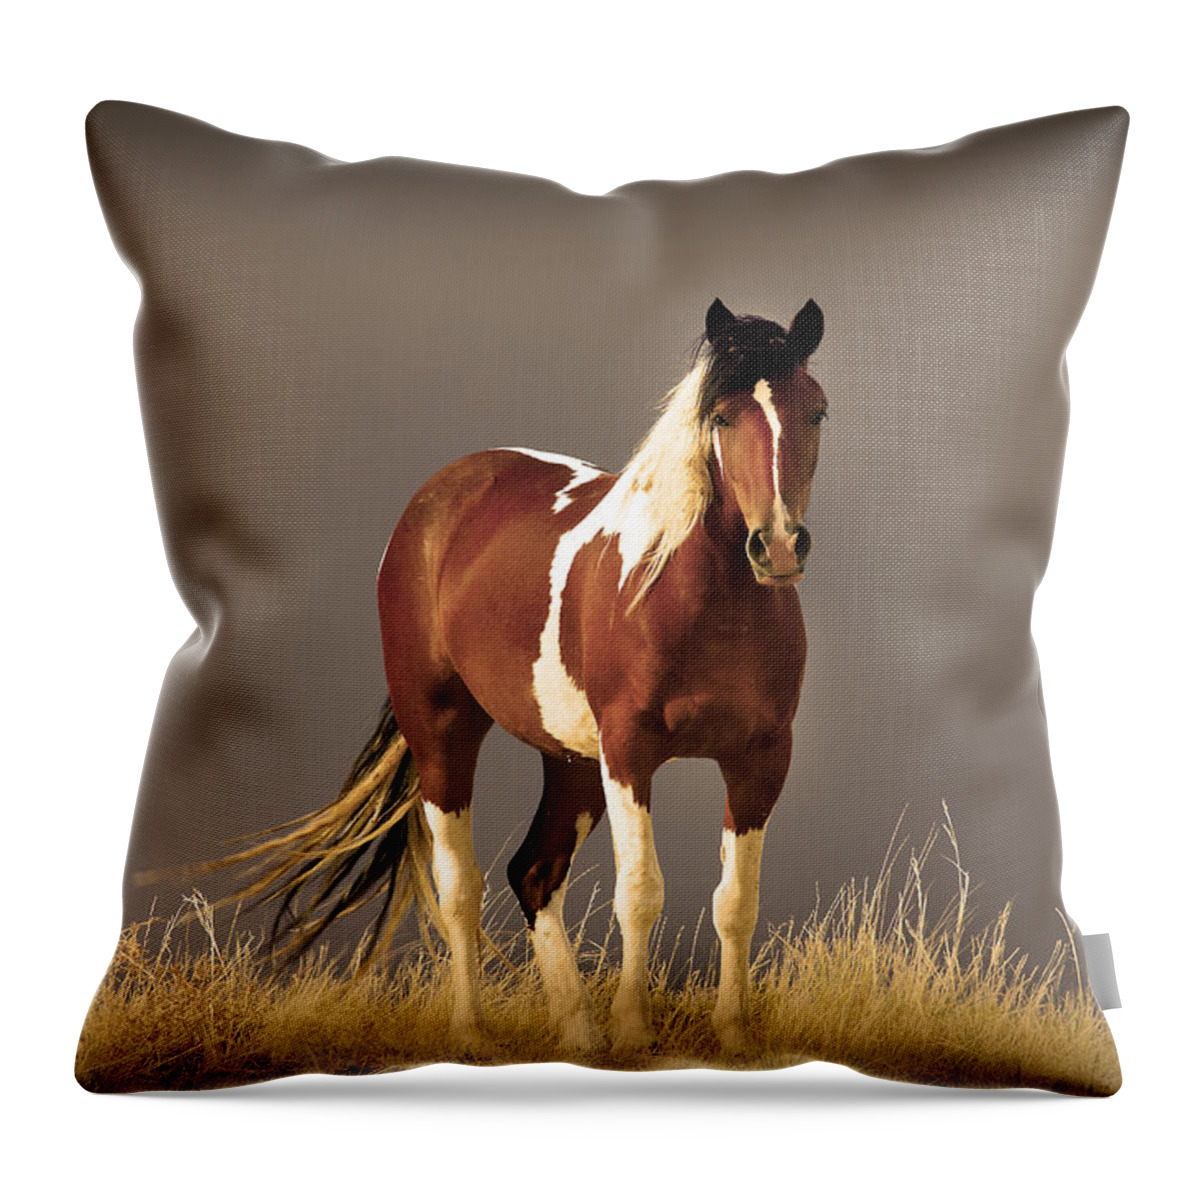 Wild Mustangs Throw Pillow featuring the photograph Paint Filly Wild Mustang Sepia Sky by Rich Franco